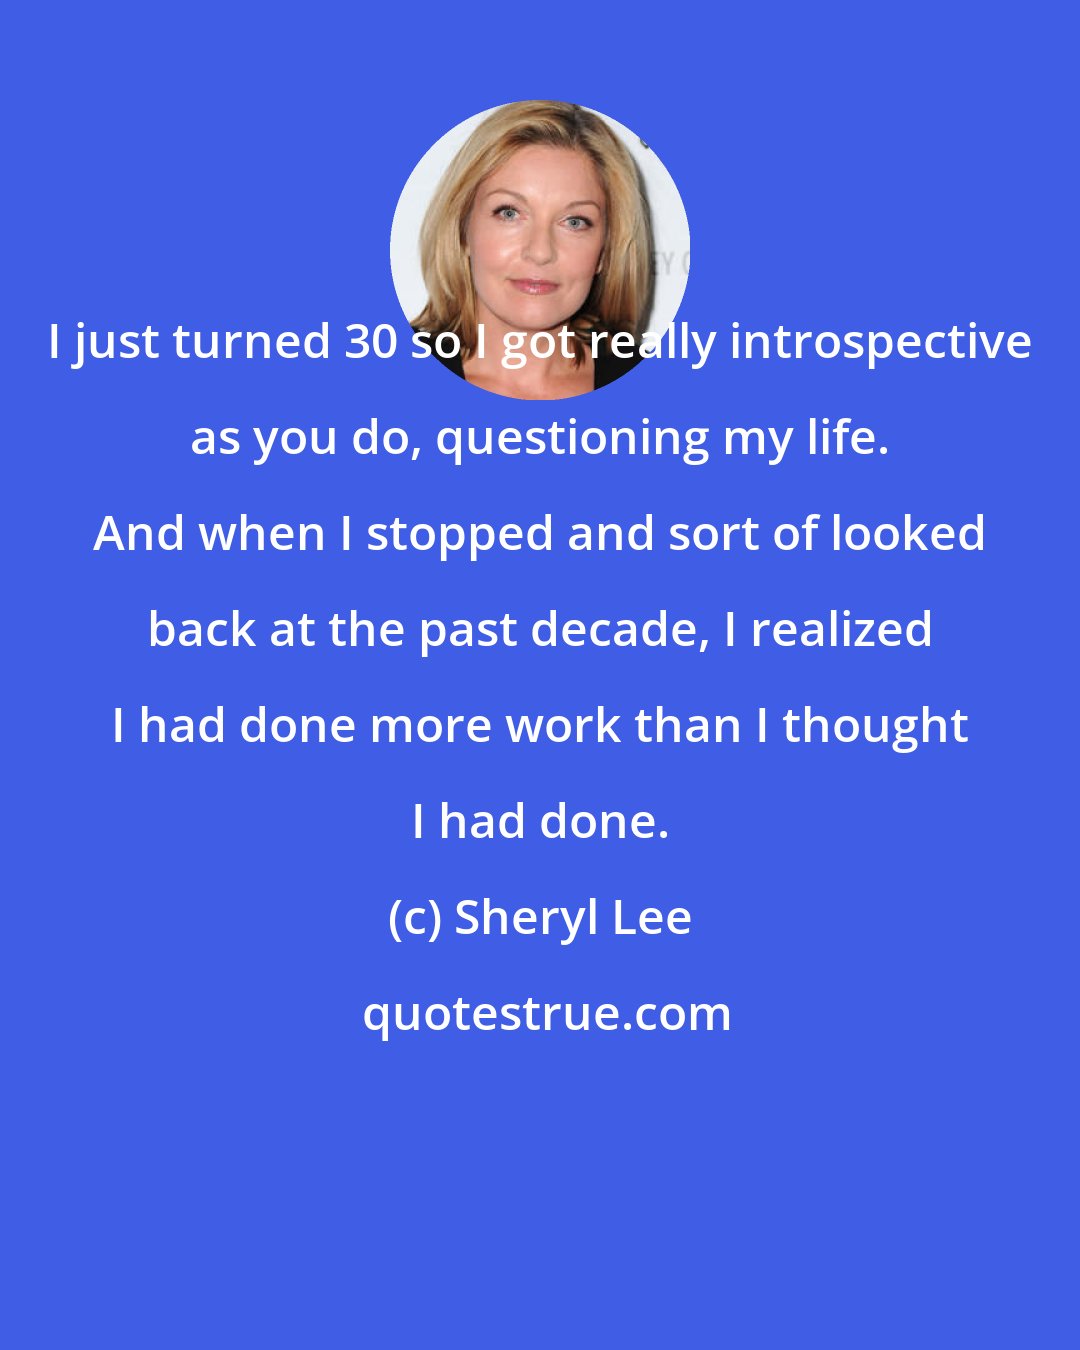 Sheryl Lee: I just turned 30 so I got really introspective as you do, questioning my life. And when I stopped and sort of looked back at the past decade, I realized I had done more work than I thought I had done.